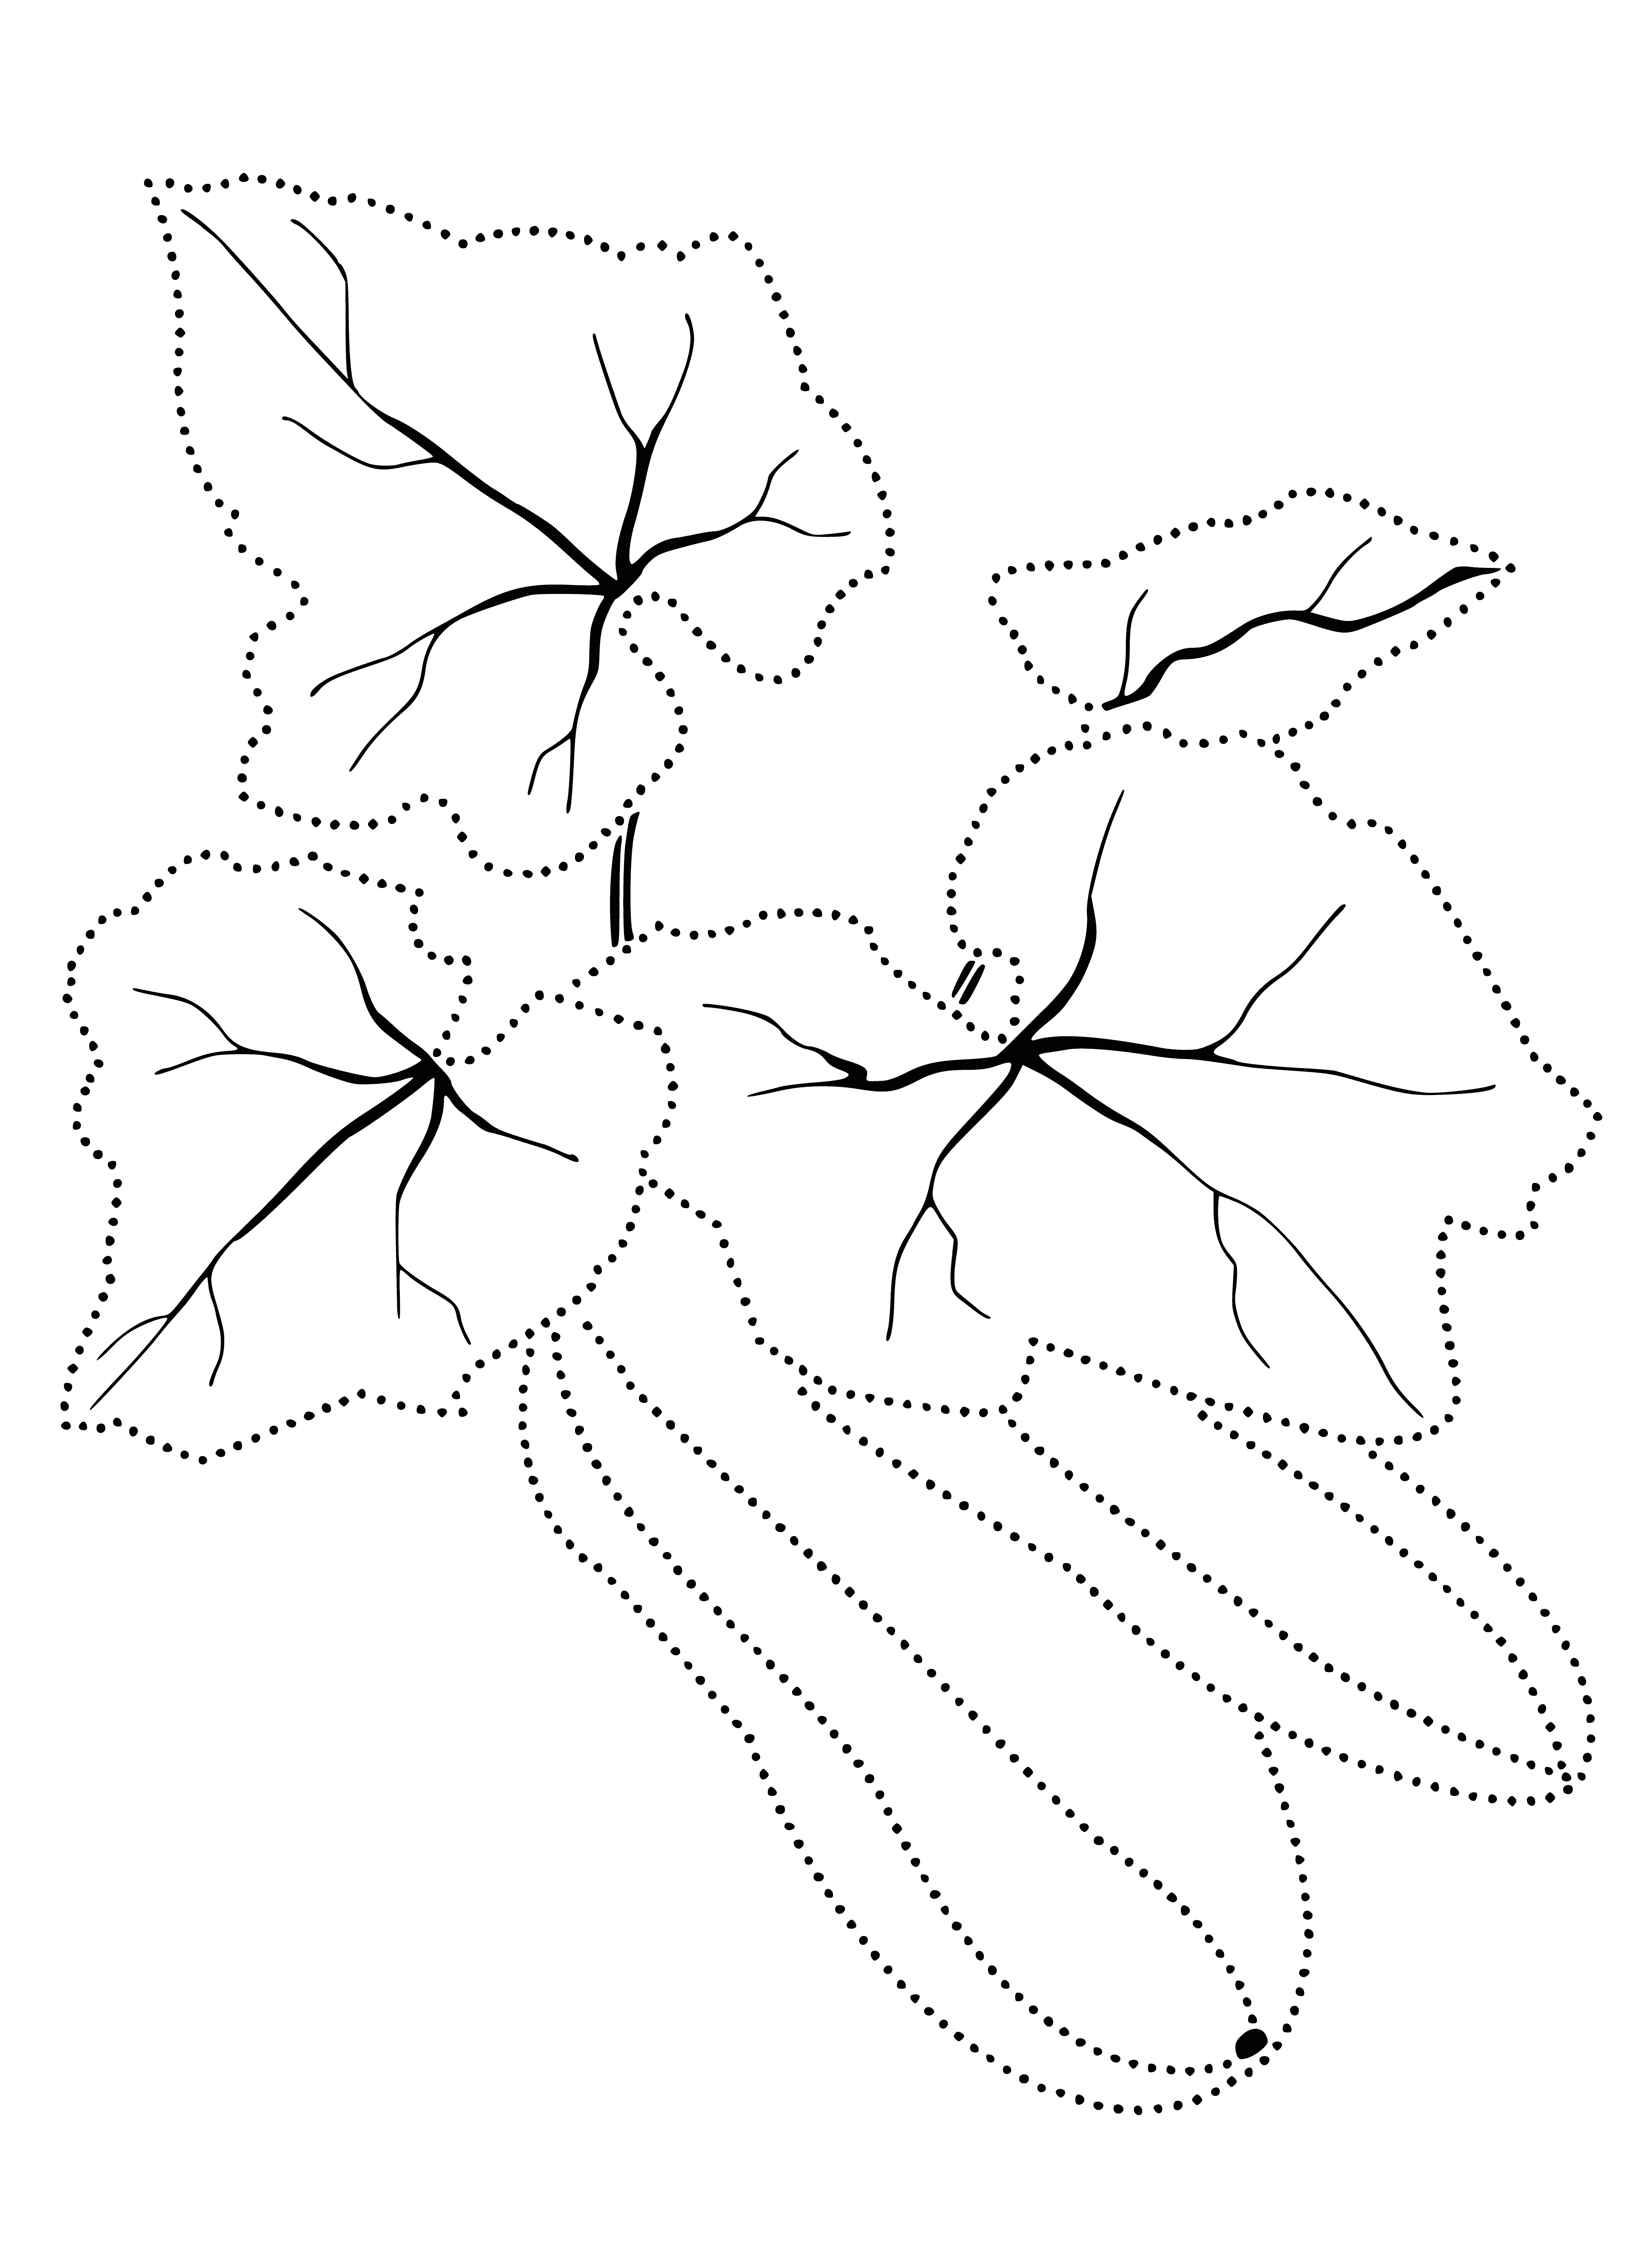 Zucchini coloring page